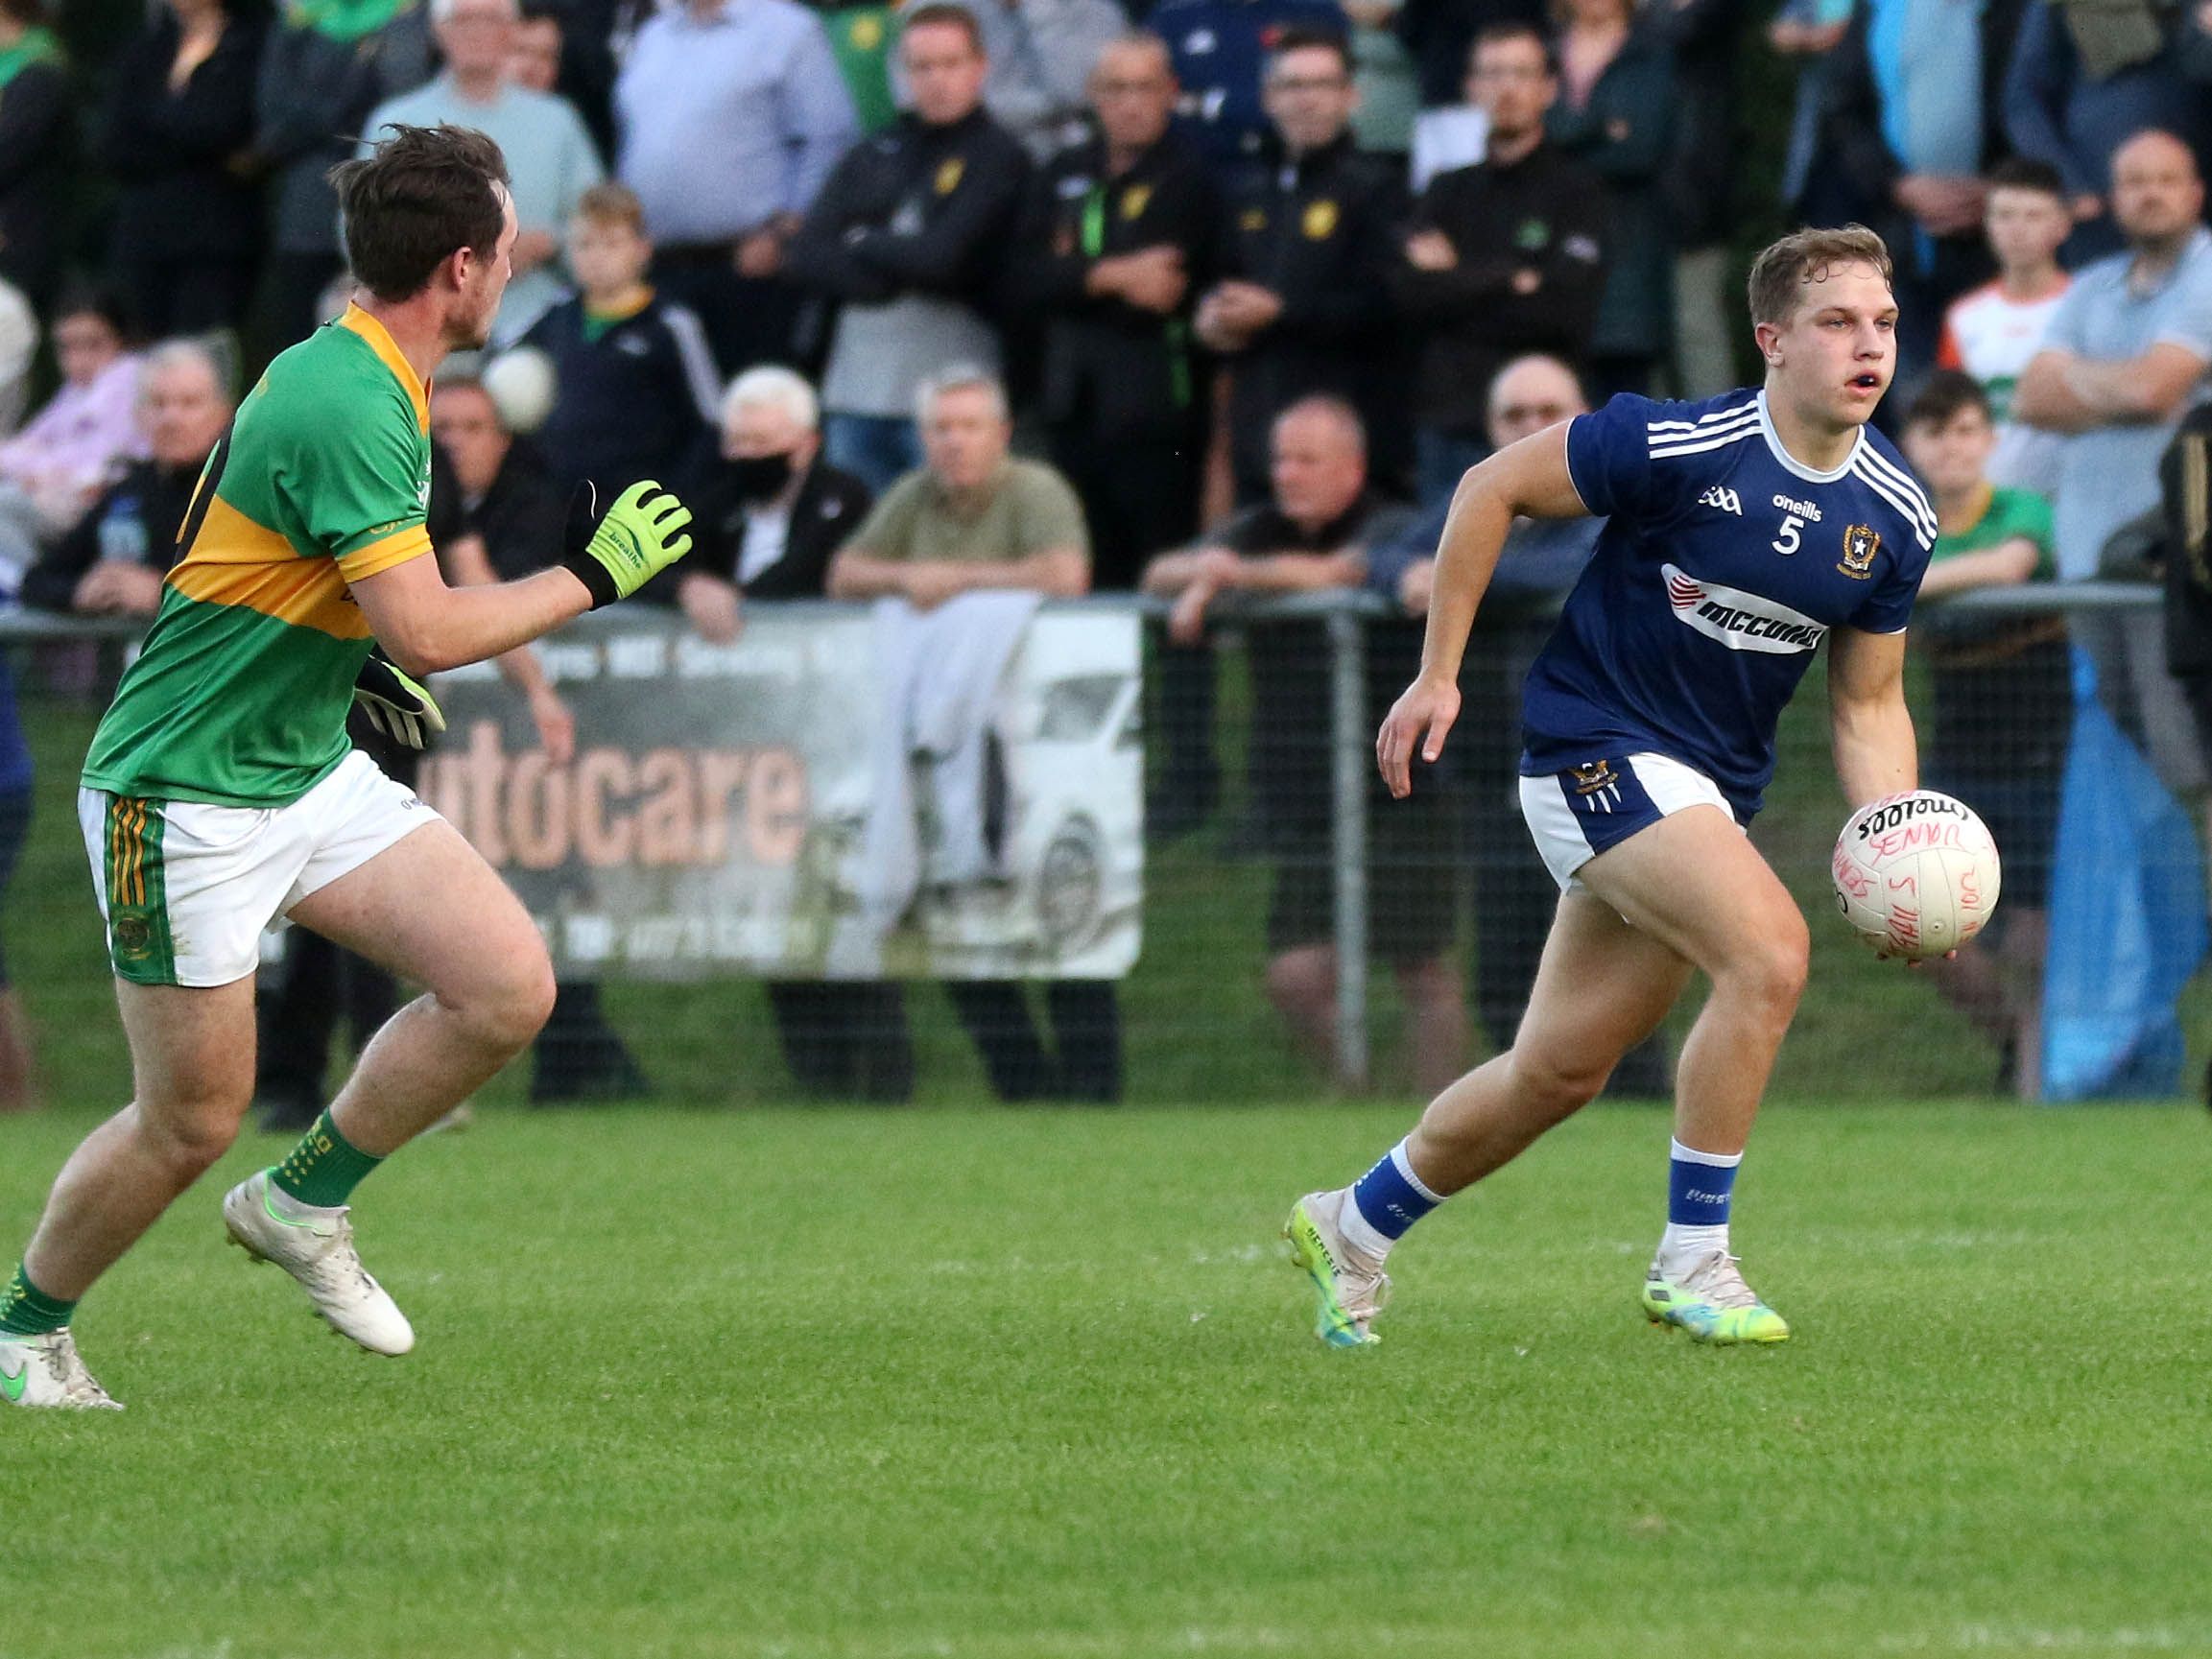 St Gall\'s defender Marcus Donnelly tried to get away from Creggan\'s Tiarnan McAteer during Wednesday night\'s Antrim SFC tie at De La Salle Park 